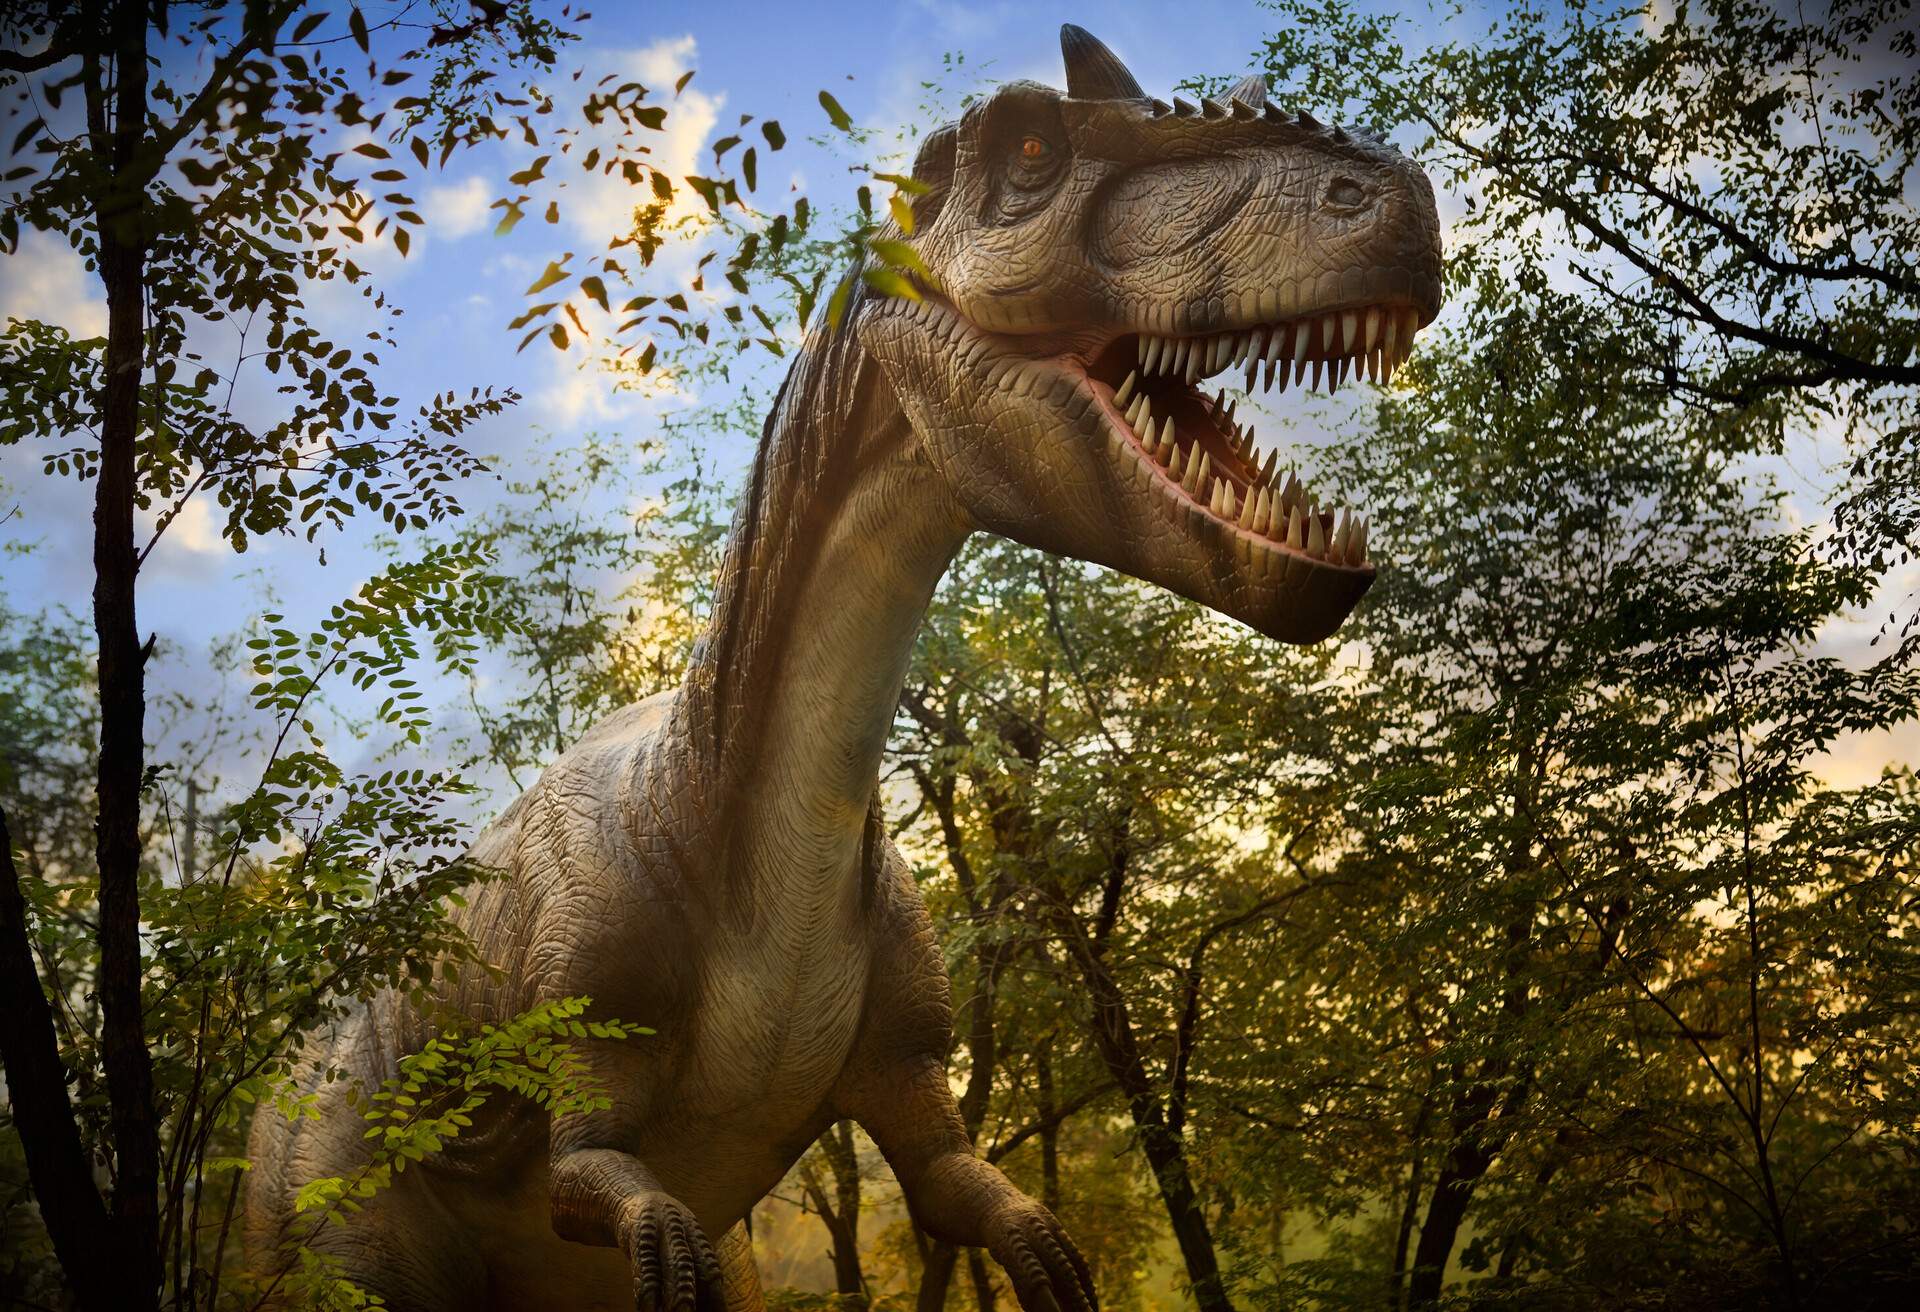 A realistic replica of a dinosaur surrounded by tall trees.